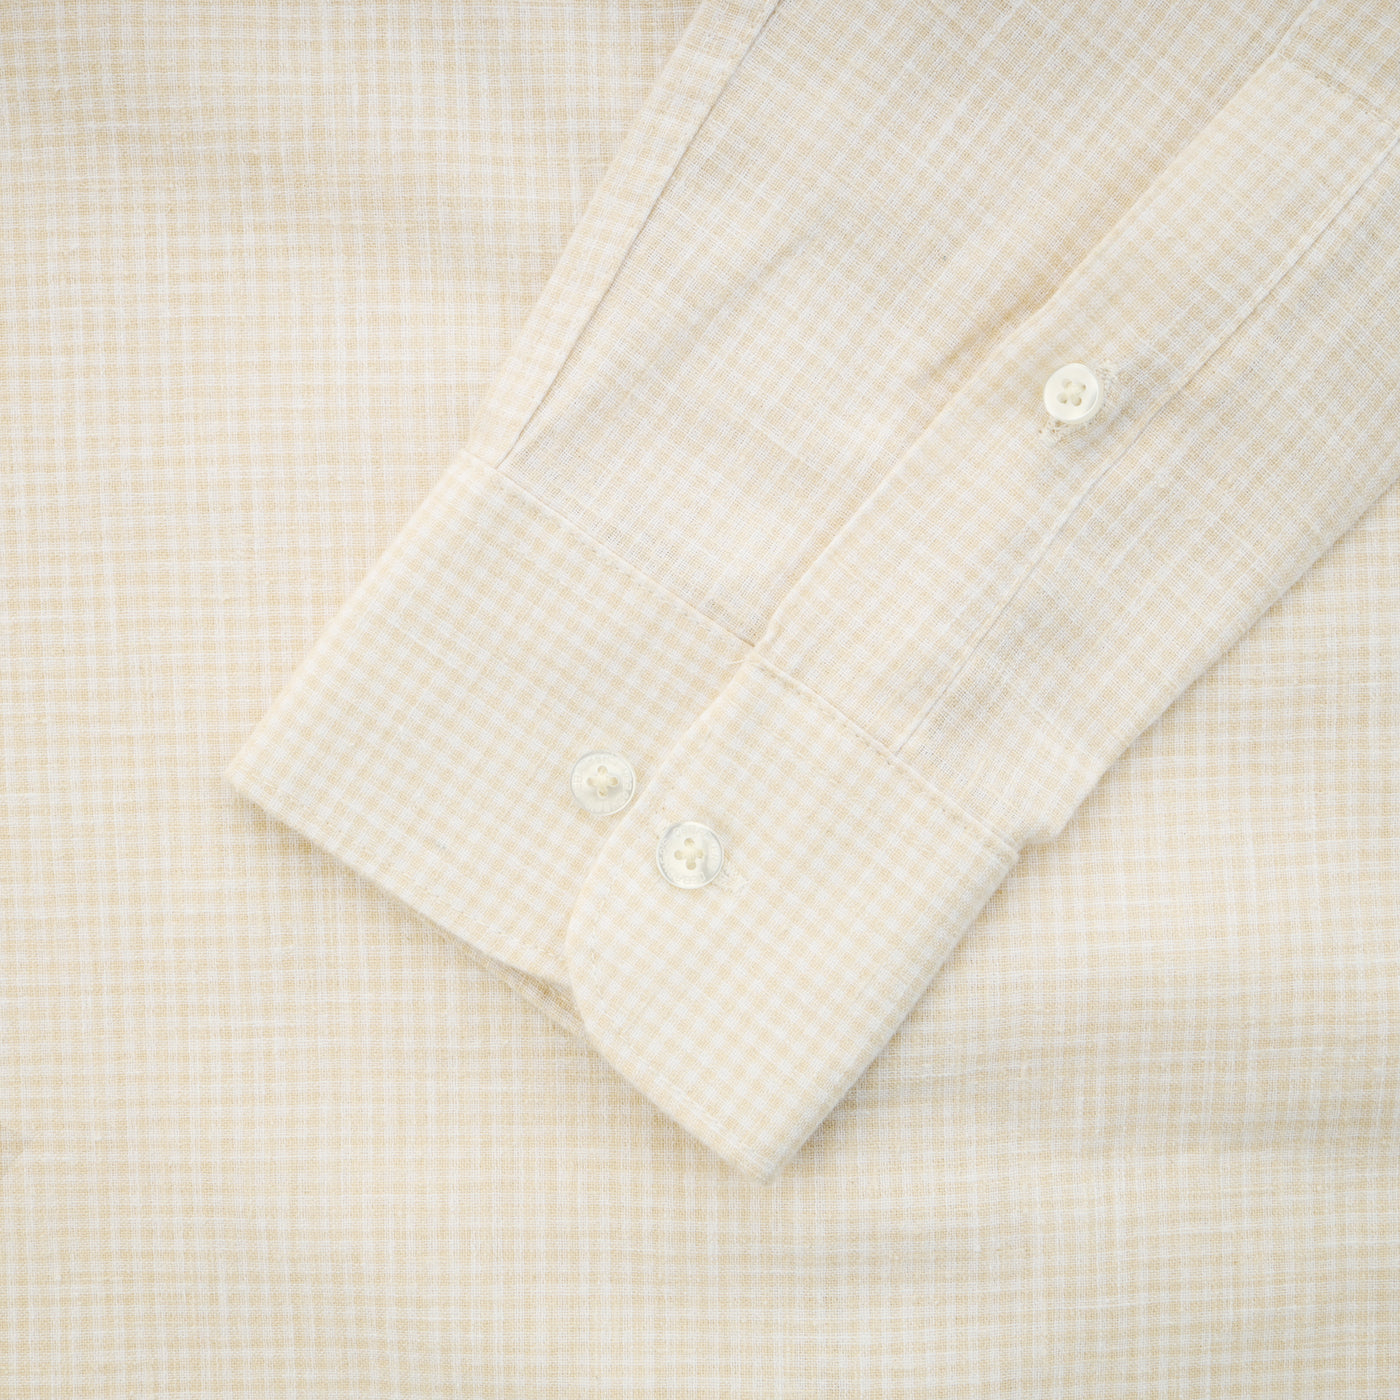 Checked Old Lace Linen Casual Shirt